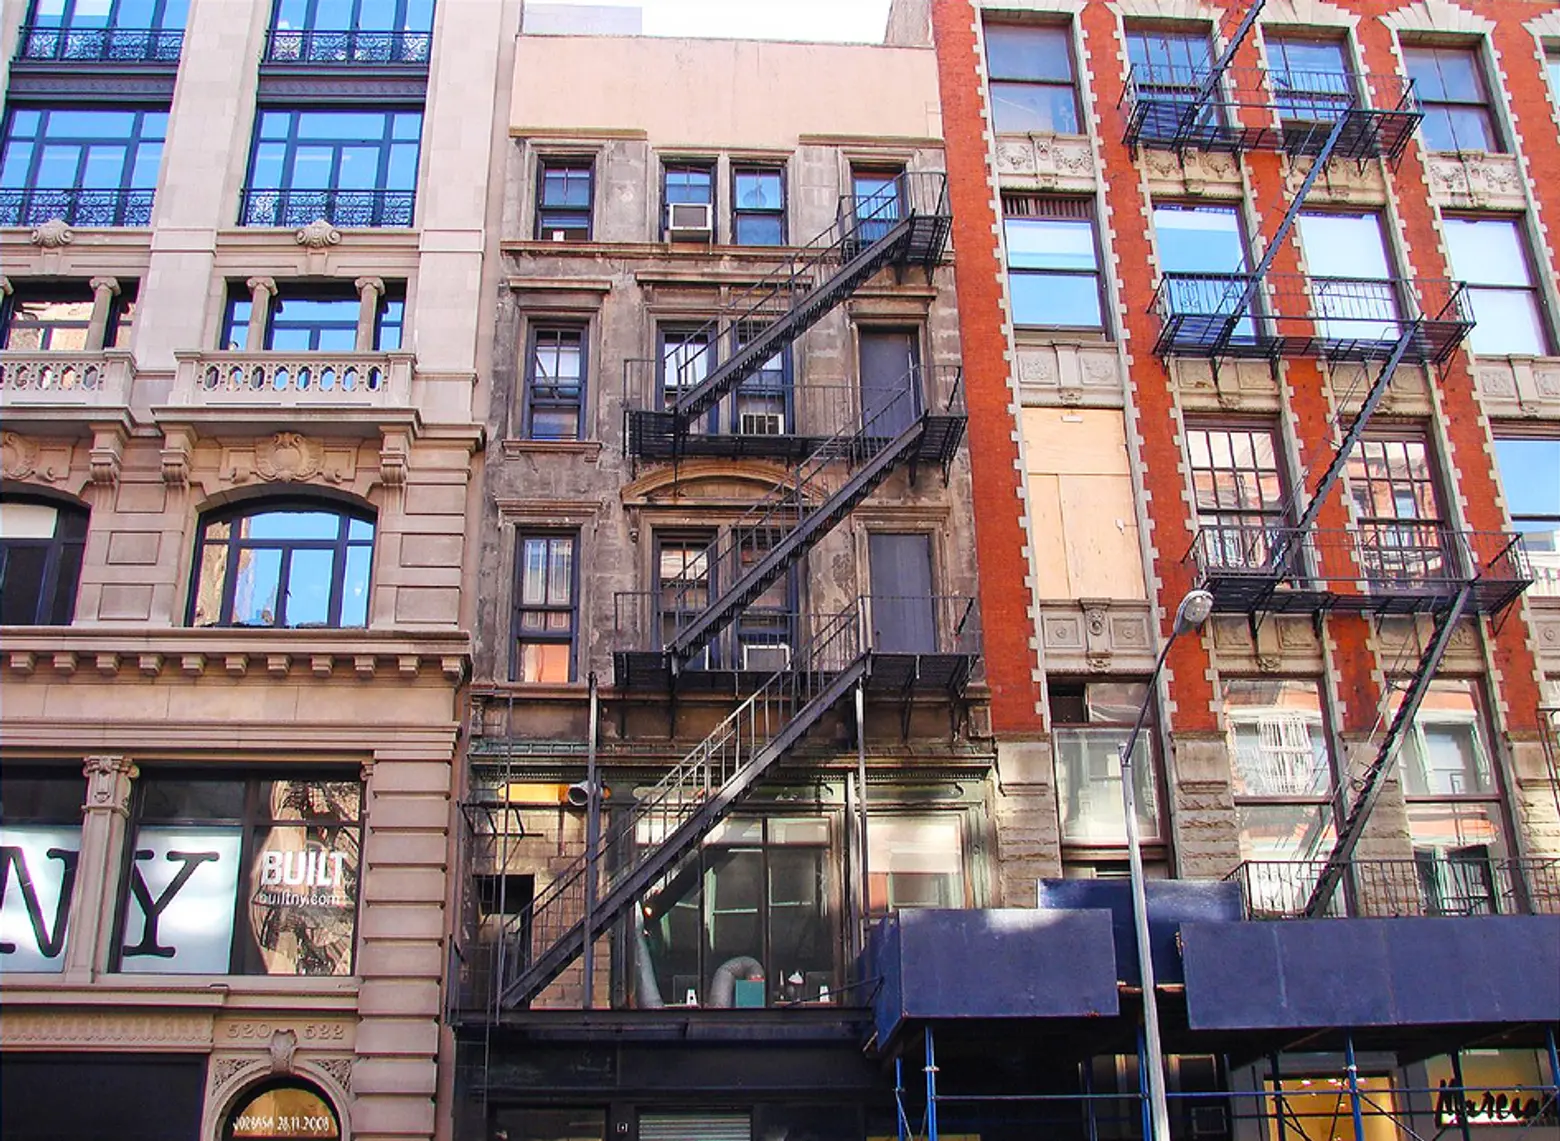 Rent Stabilization Demystified: Know the Rules, Your Rights, and if You’re Getting Cheated